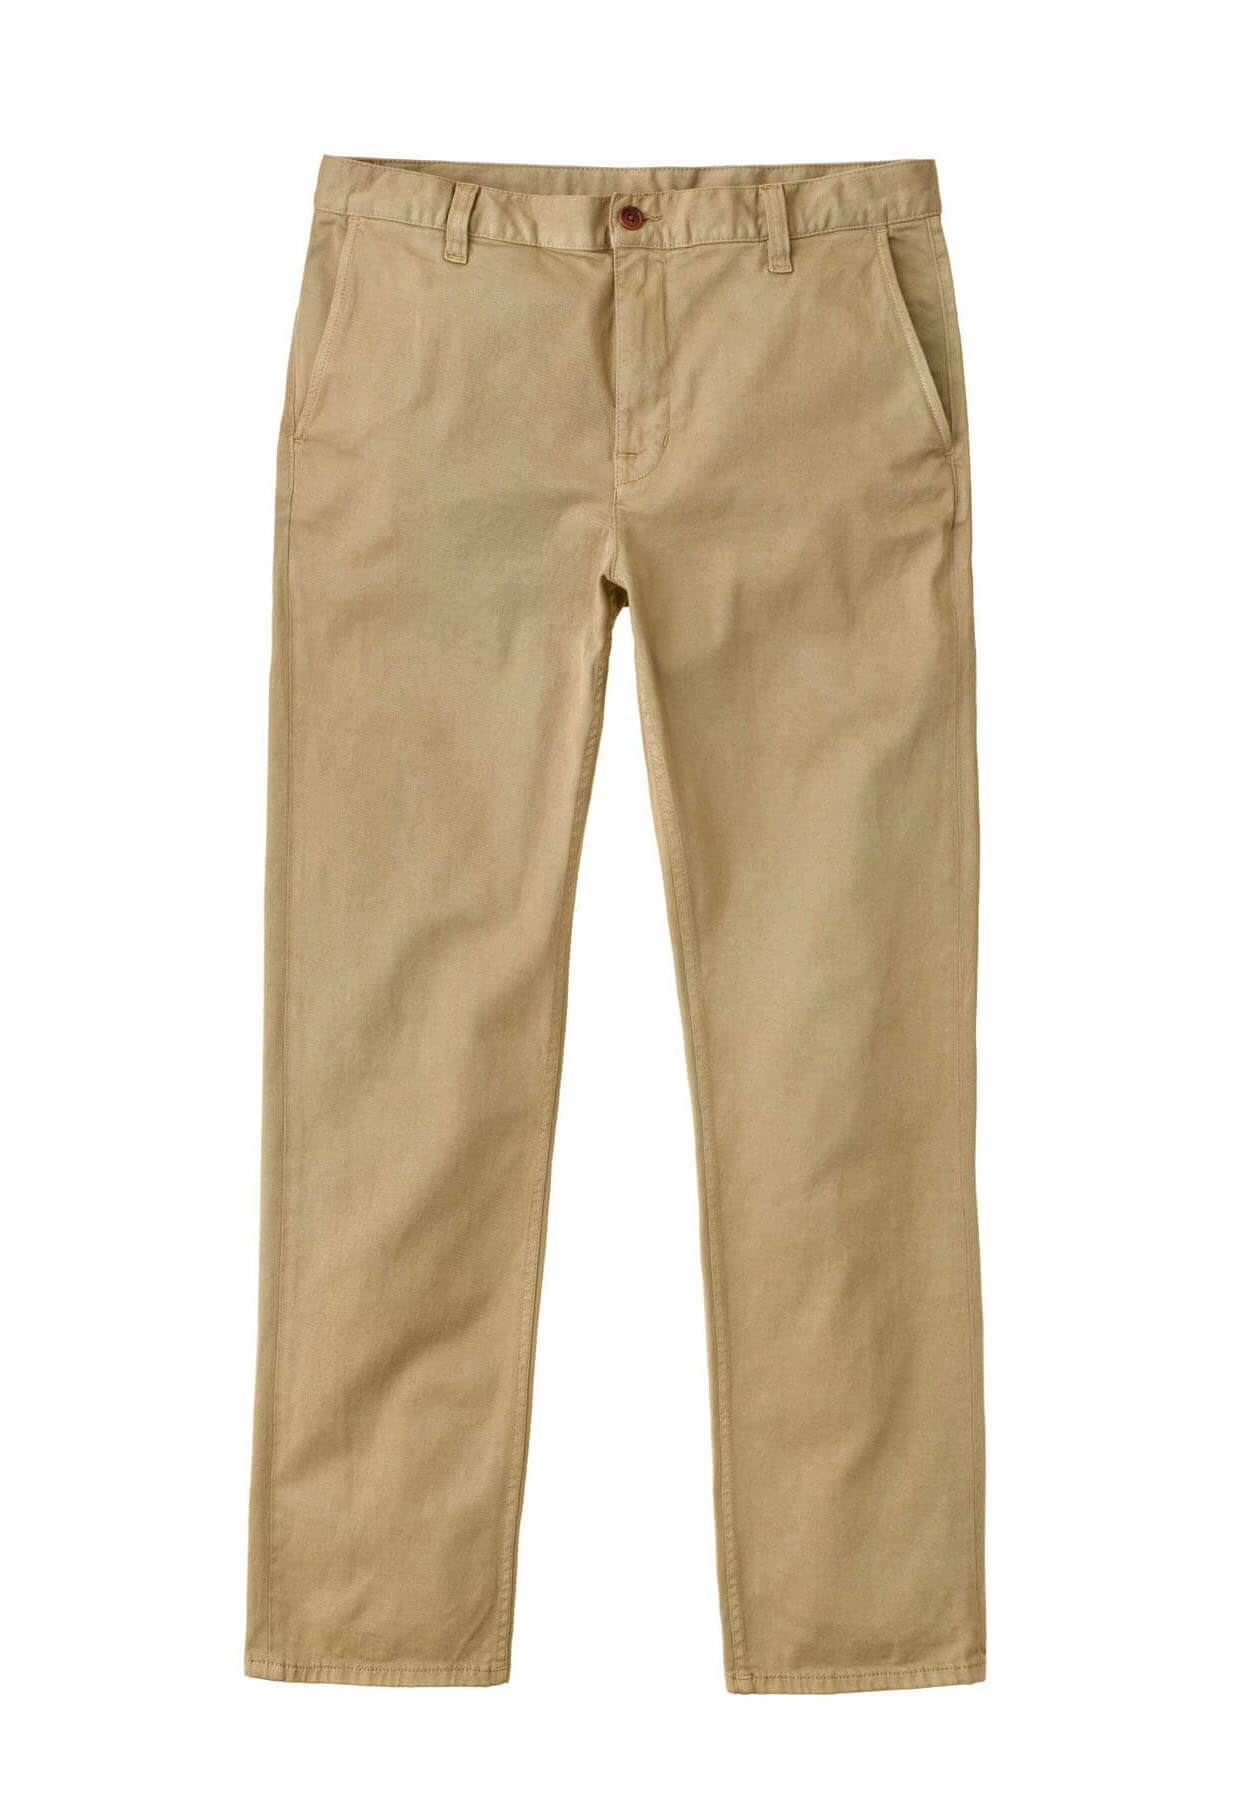 NUDIE JEANS Chinohose Easy Alvin Beige 34/32